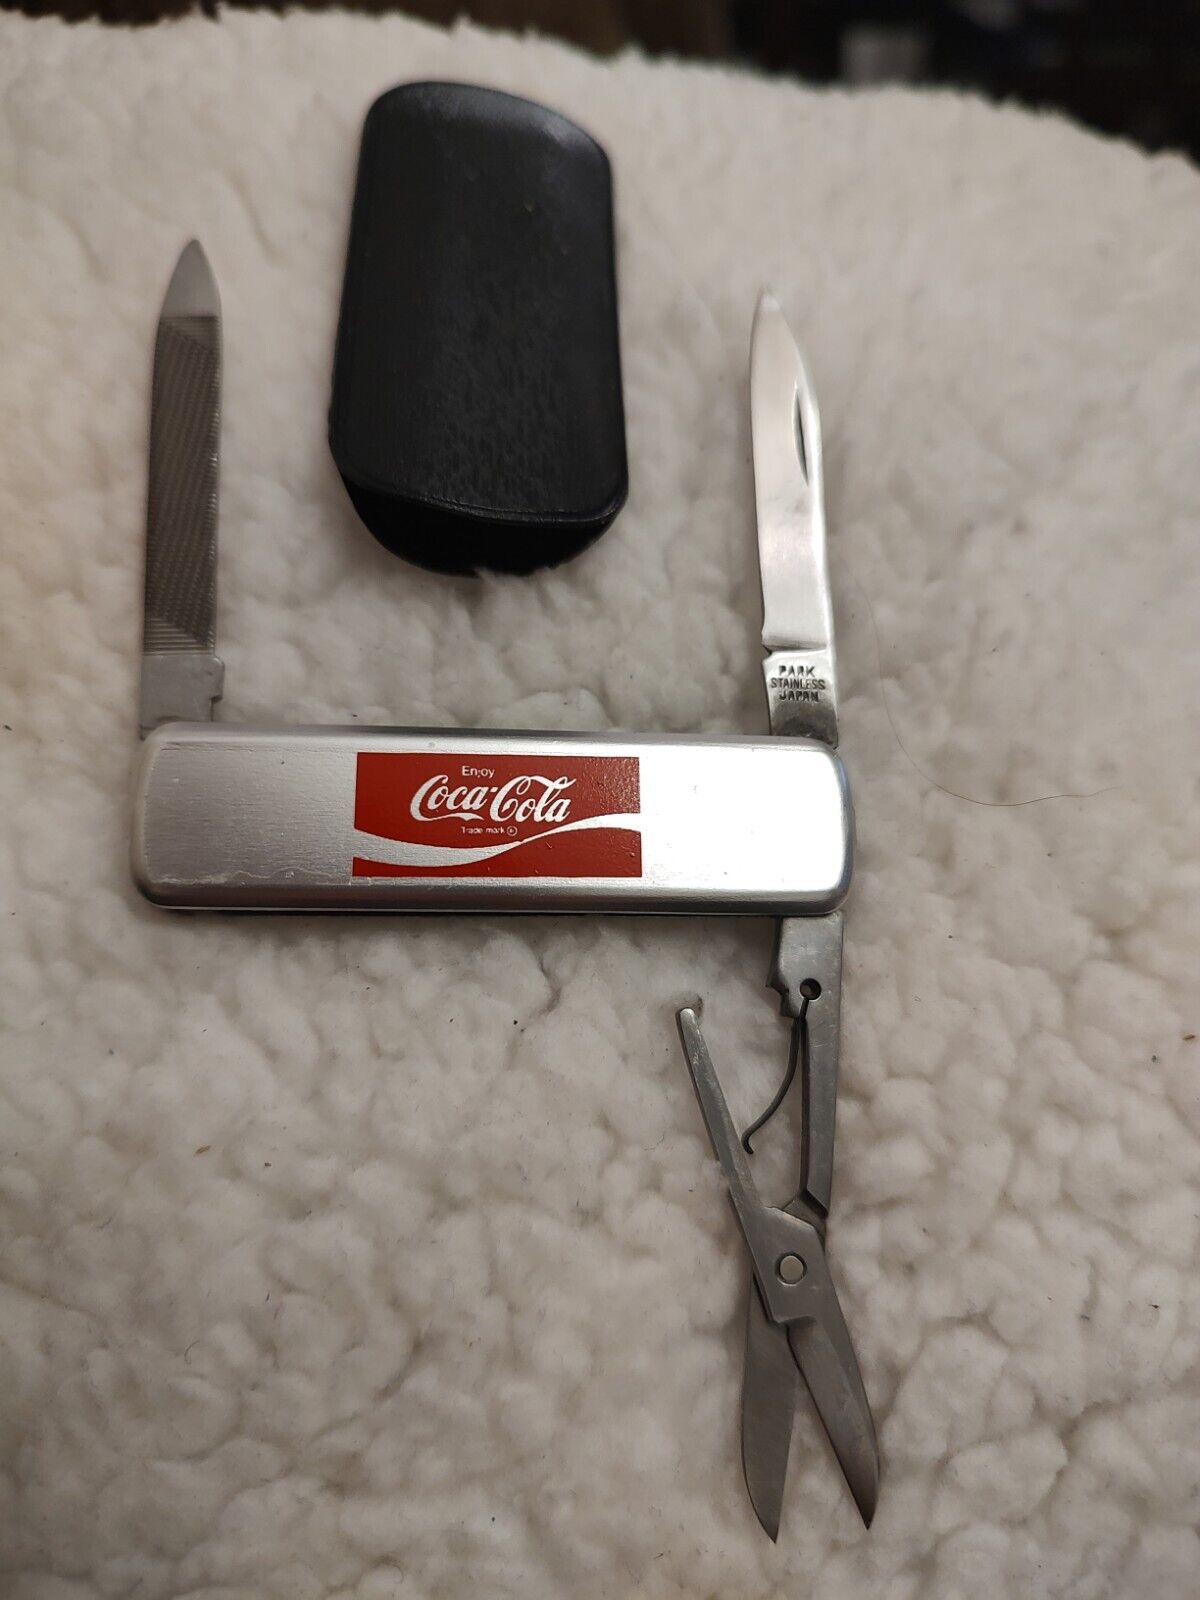 Park Tool Pocket Knife With Coca Cola Advertisement